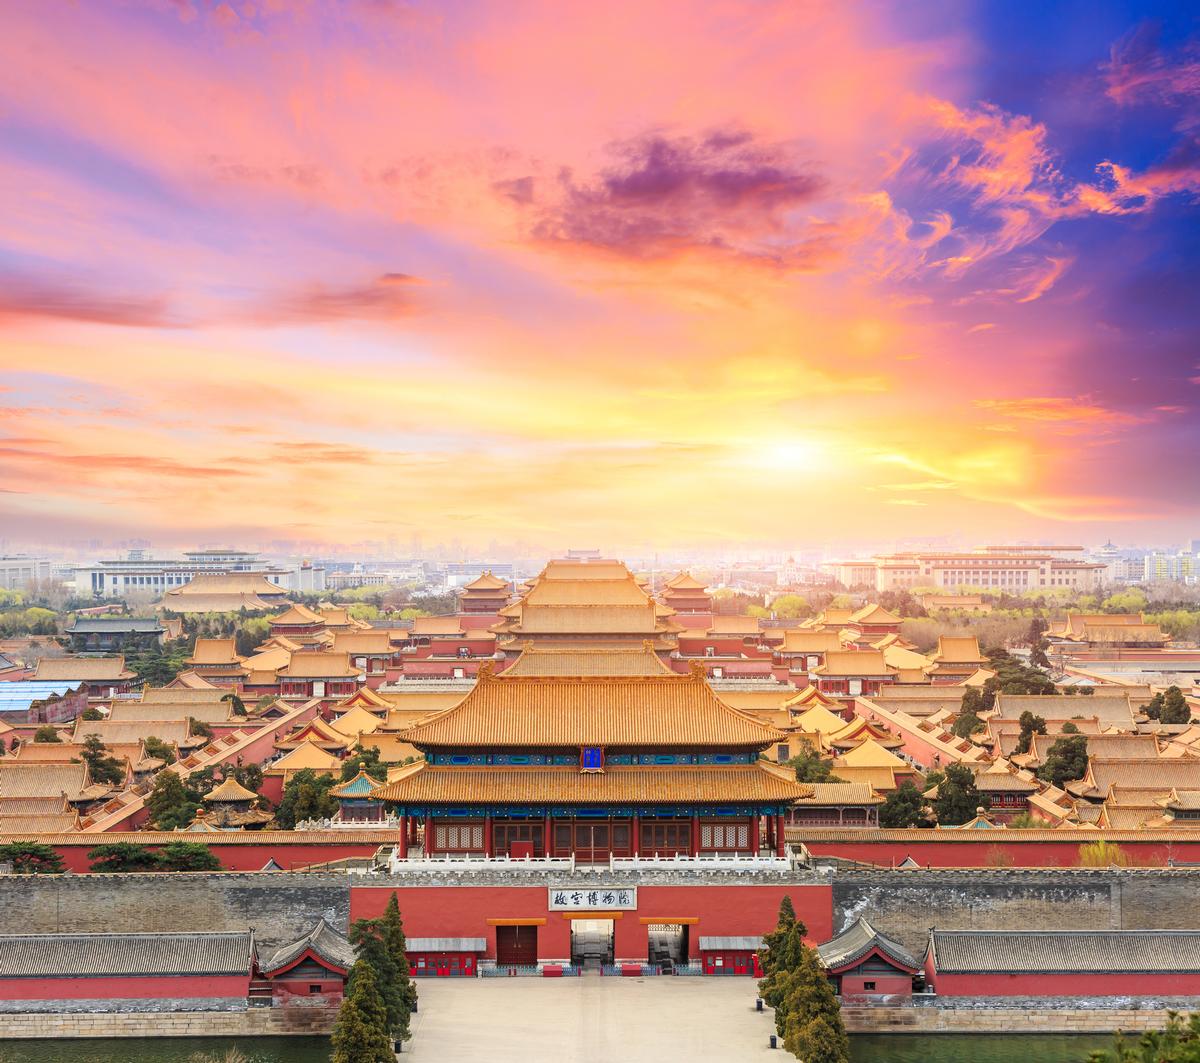 Beijing's Forbidden City is closed to tourists from Saturday 25 January, until further notice / Shutterstock